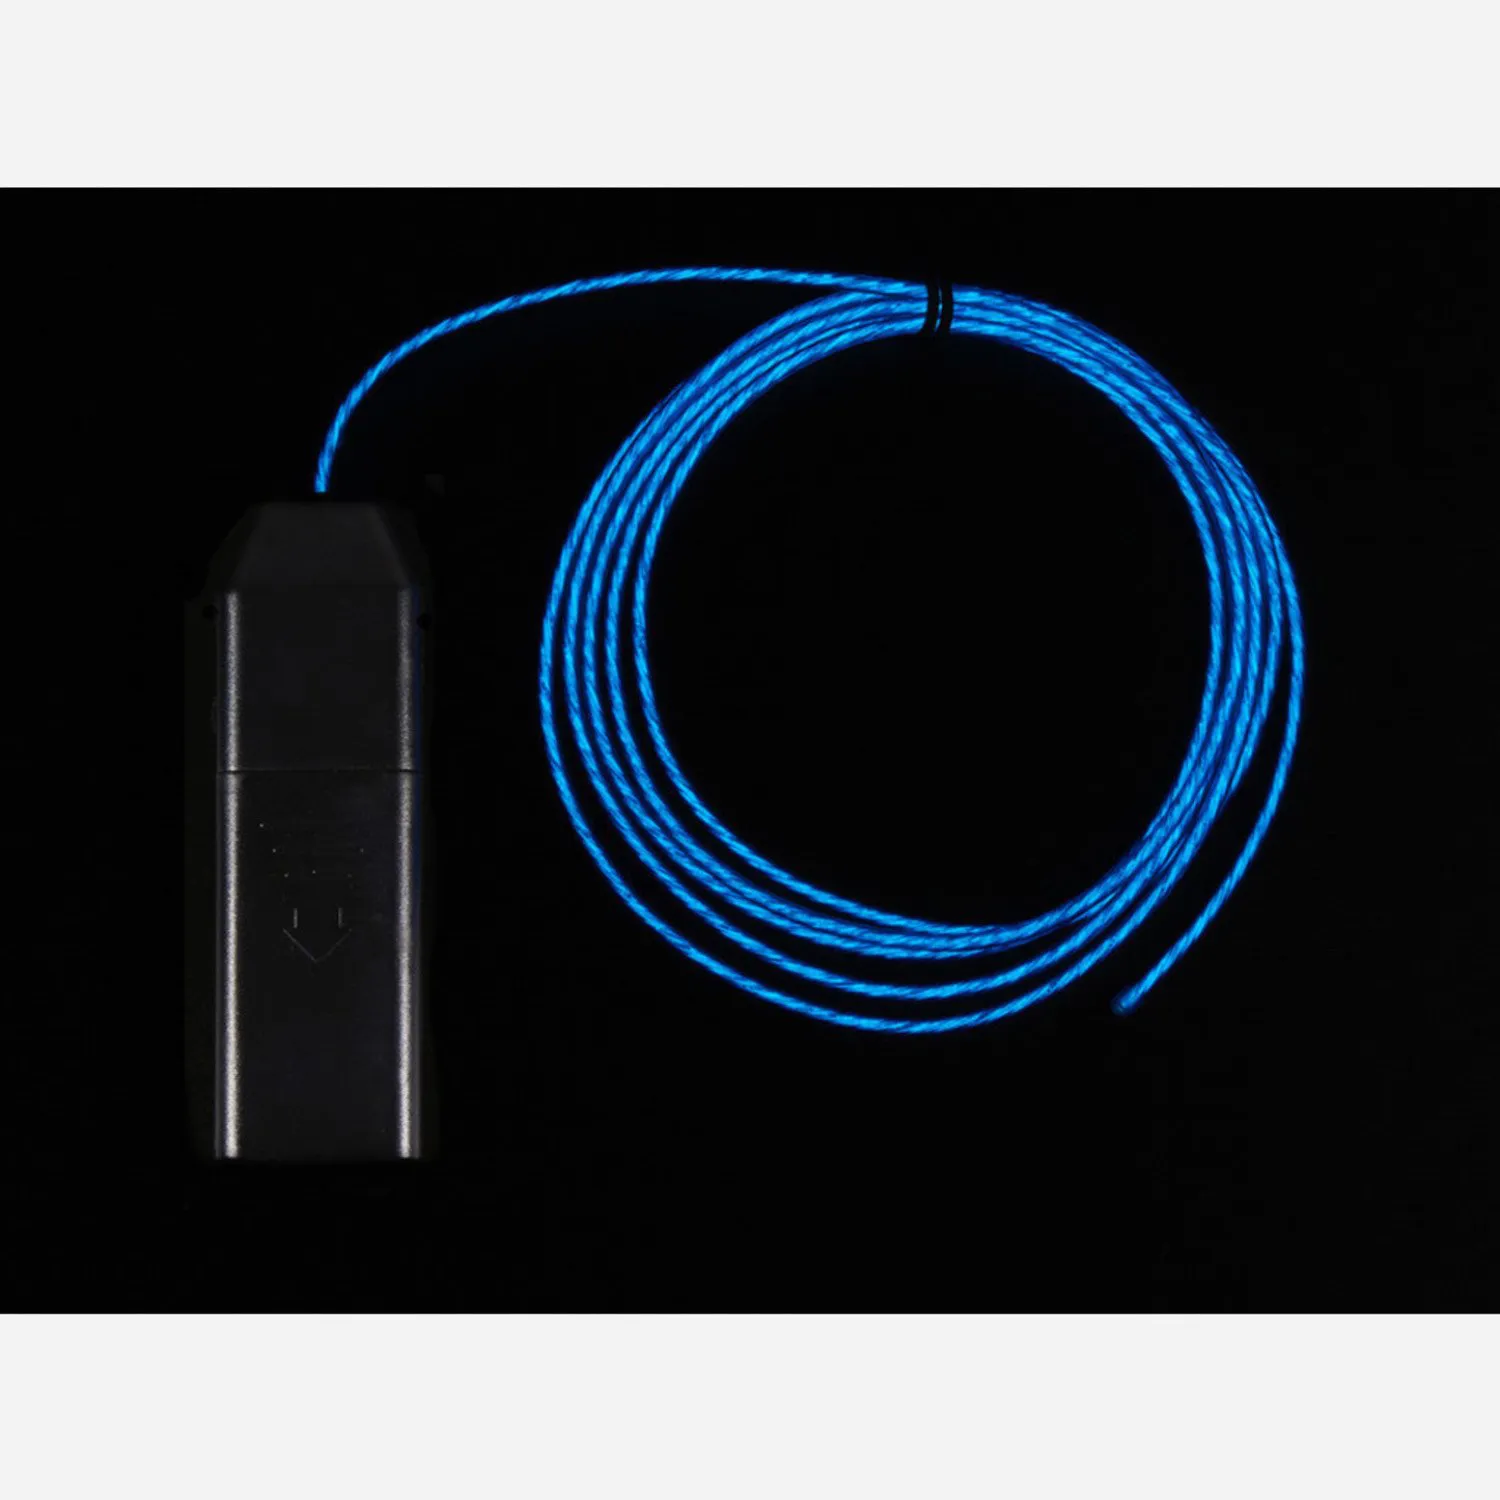 Photo of EL Flowing Effect Wire with Inverter - Blue 2.0 meter (6.5 ft)